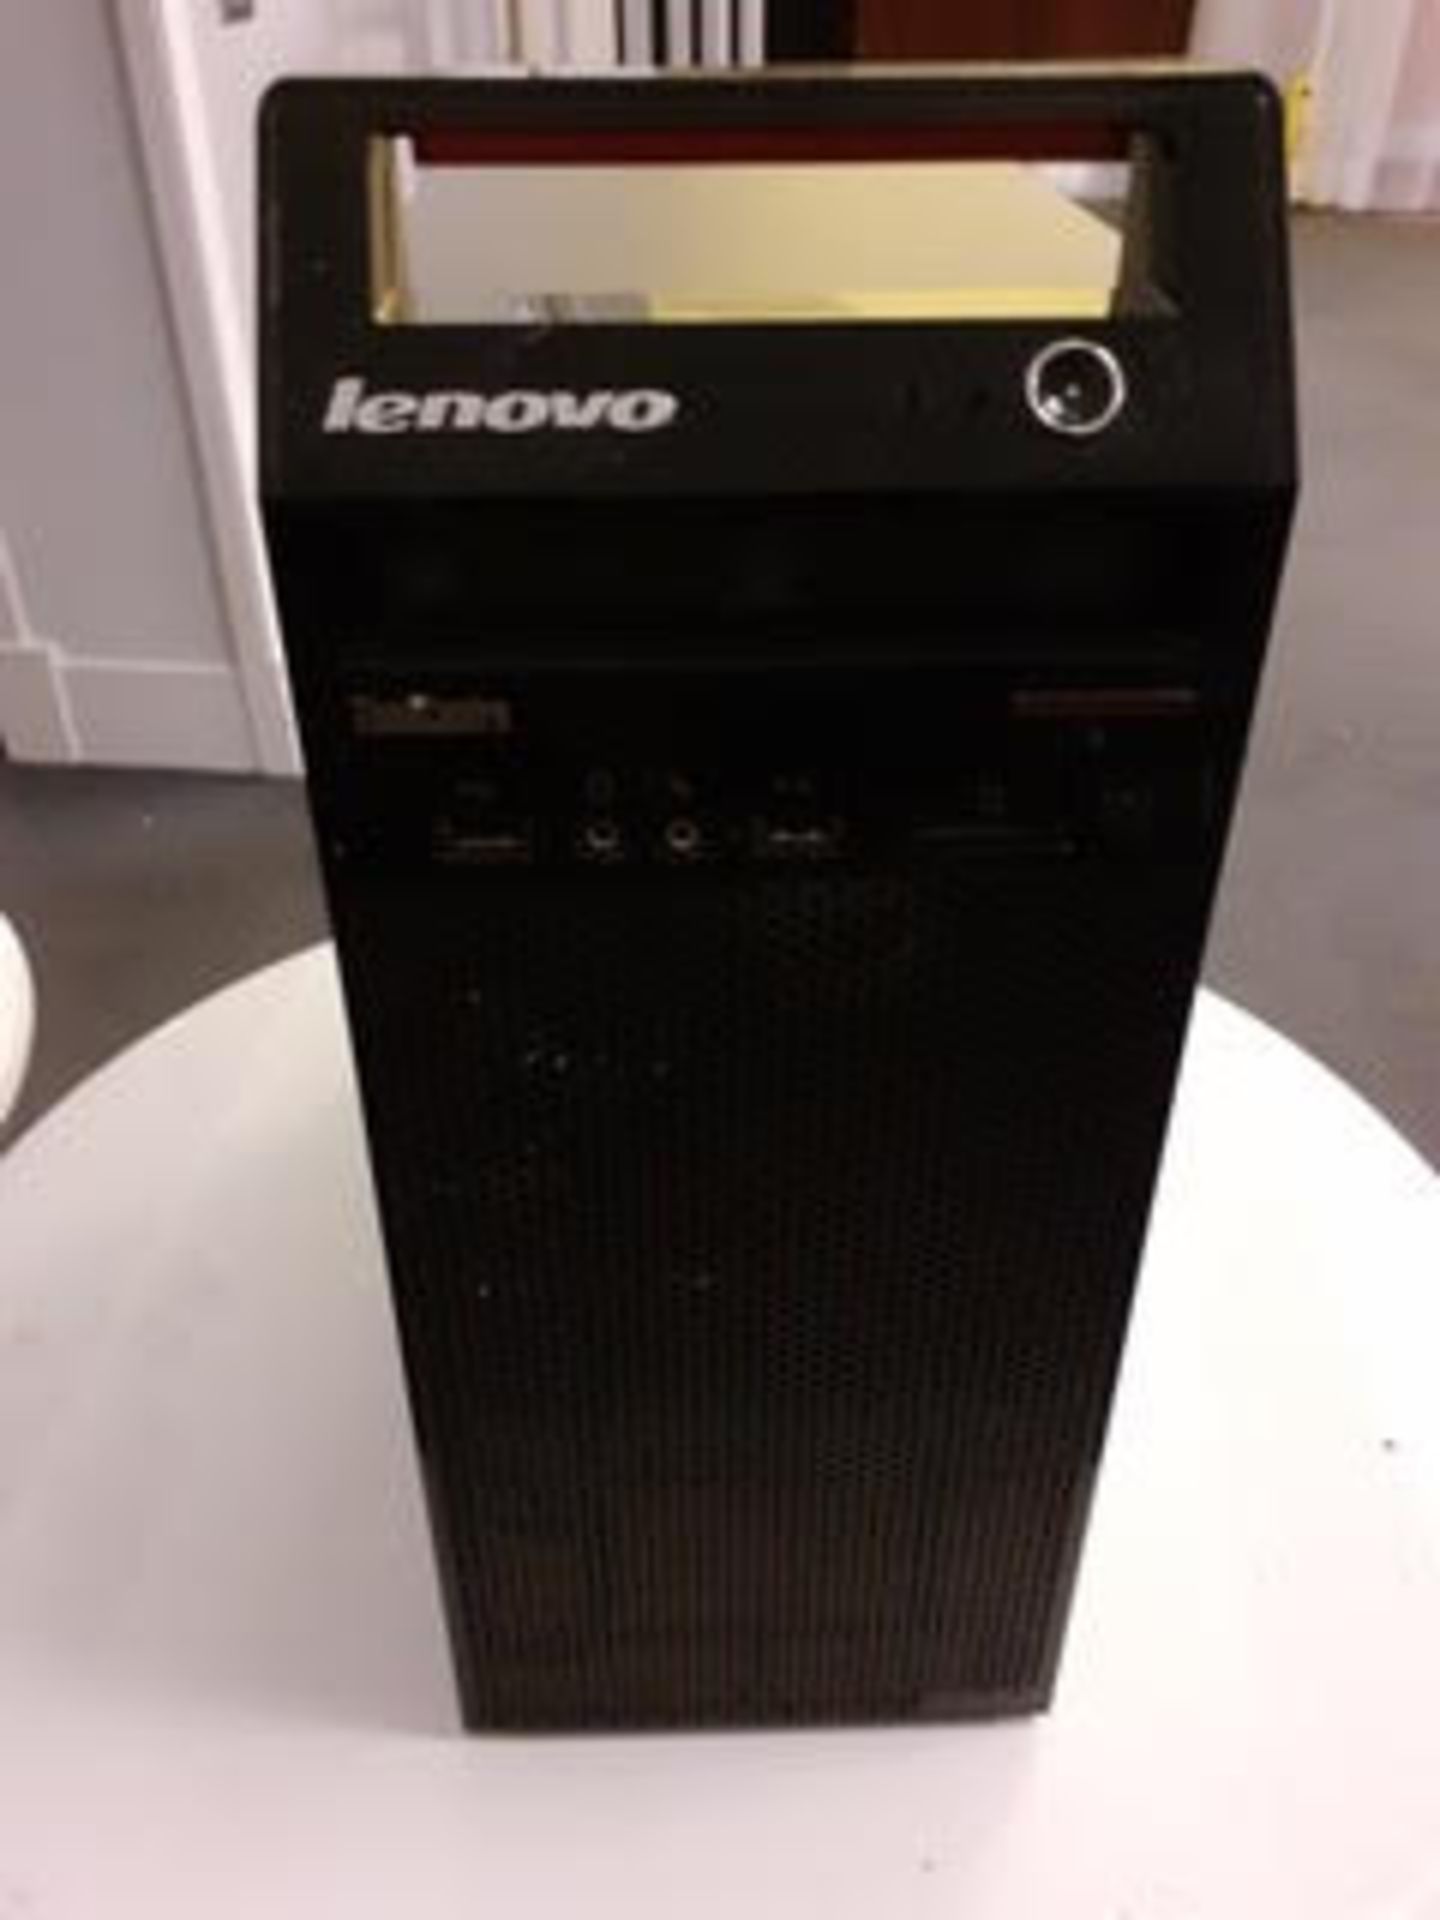 Lenovo Think Centre Tower PC unit. – Located 100 N